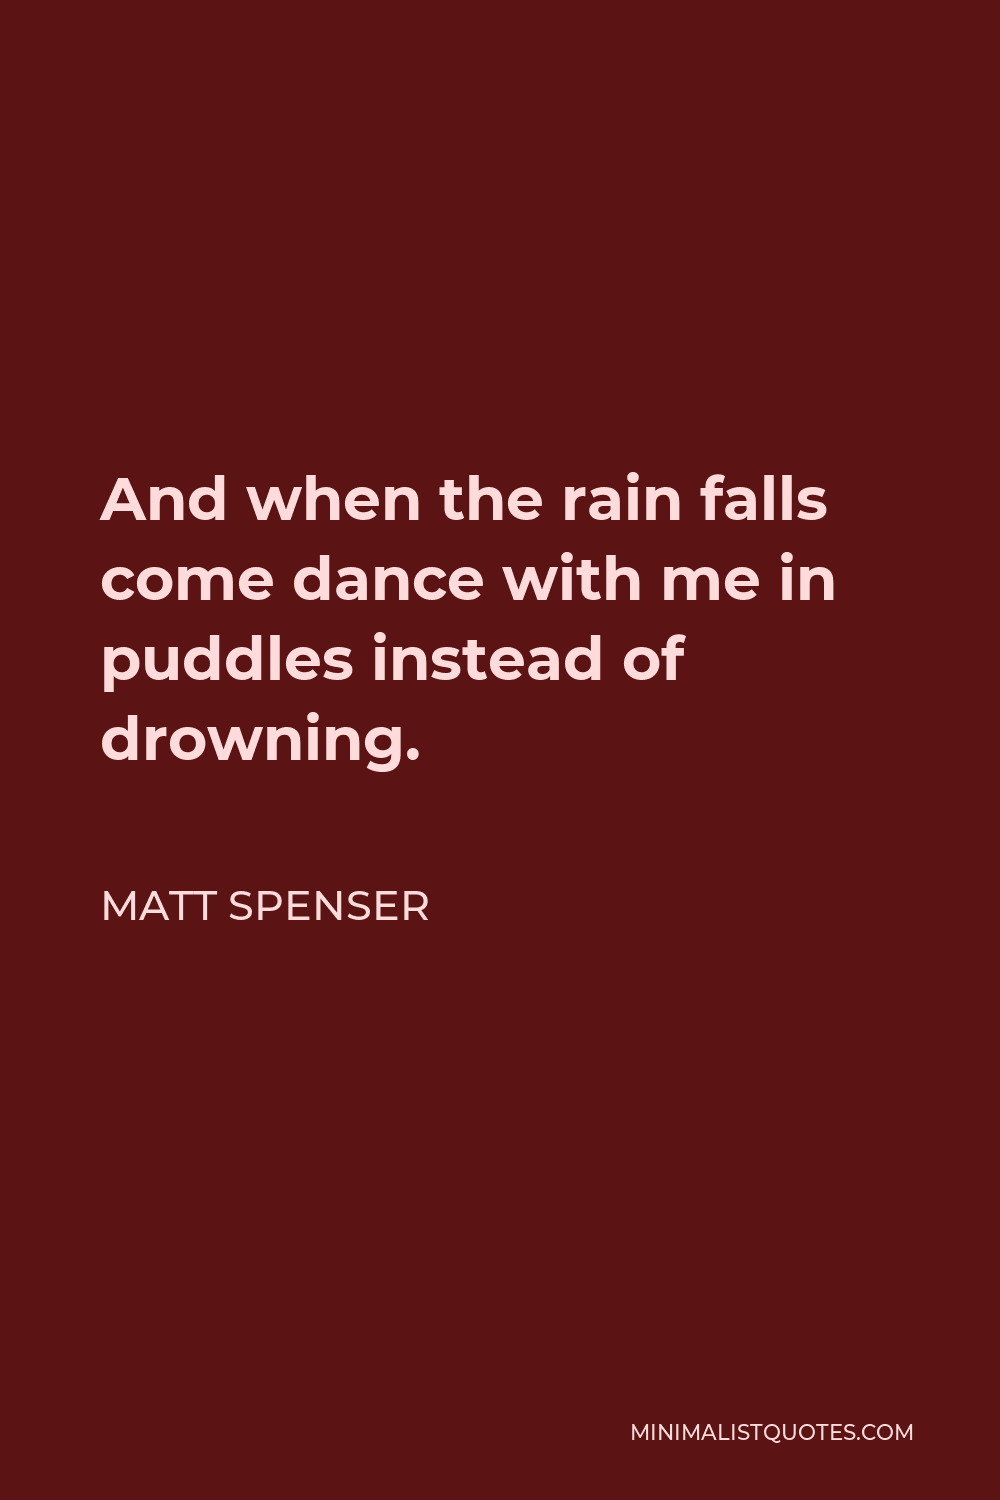 Matt Spenser Quote - And when the rain falls come dance with me in puddles instead of drowning.